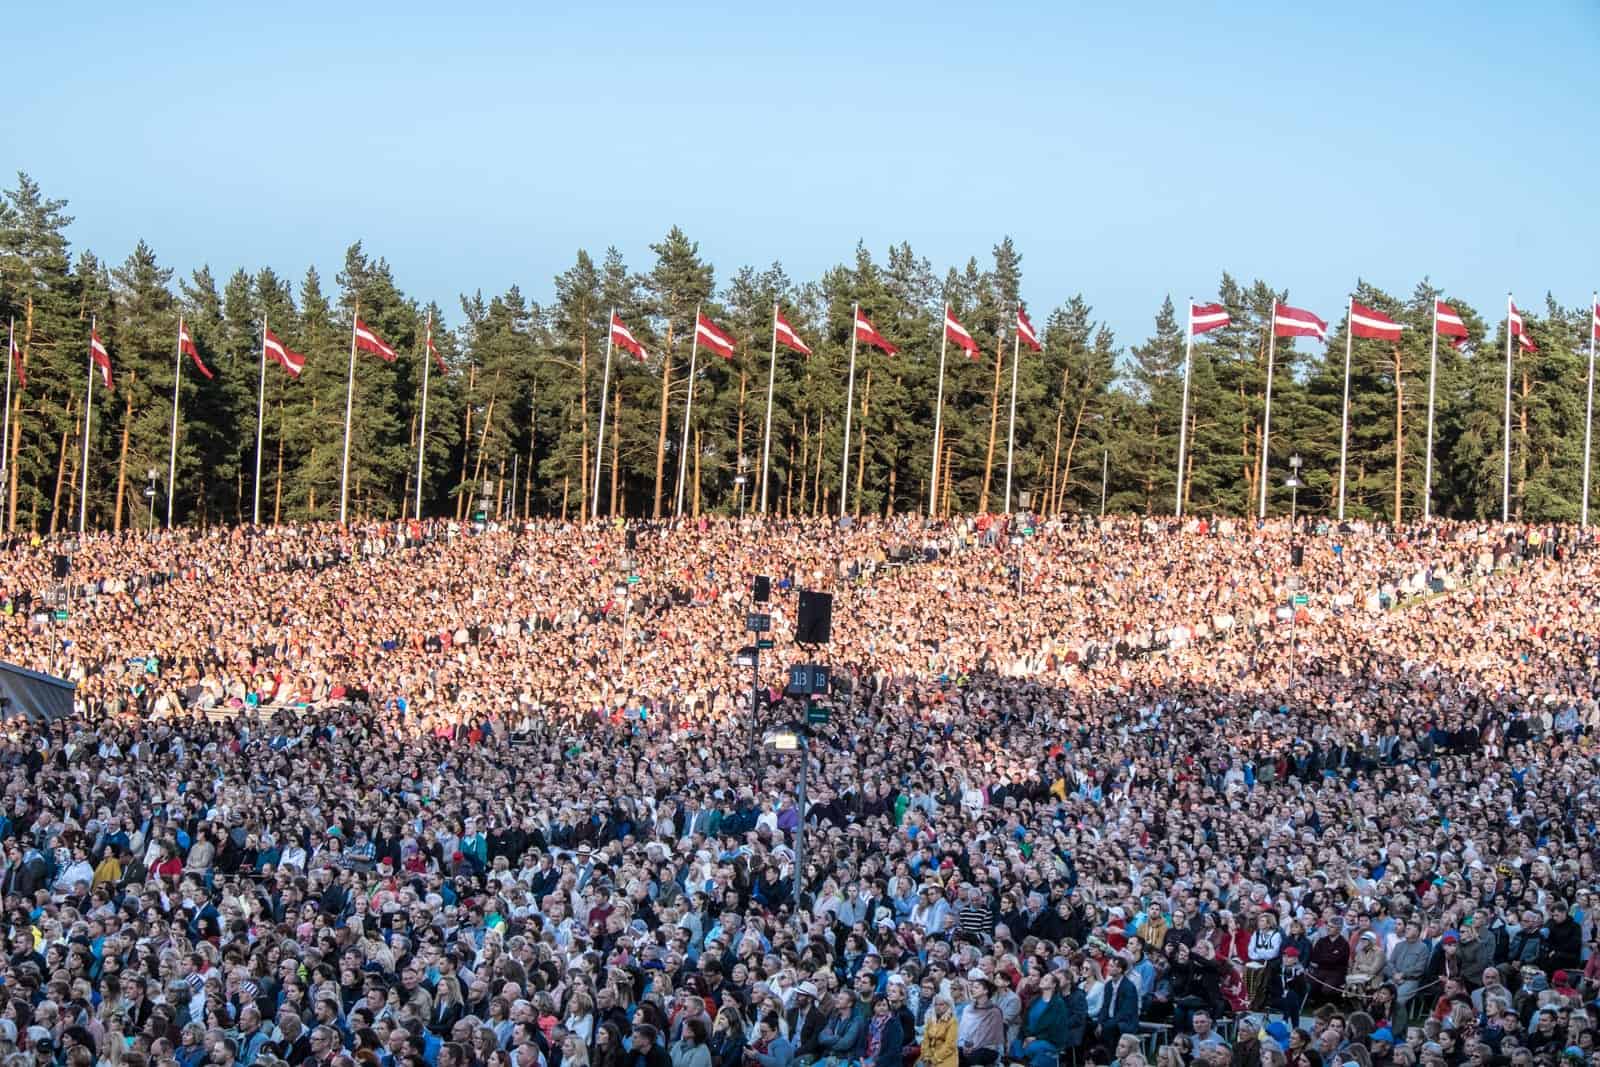 Thousands of people in the crowd at the closing event of the Song and Dance Celebration in Latvia